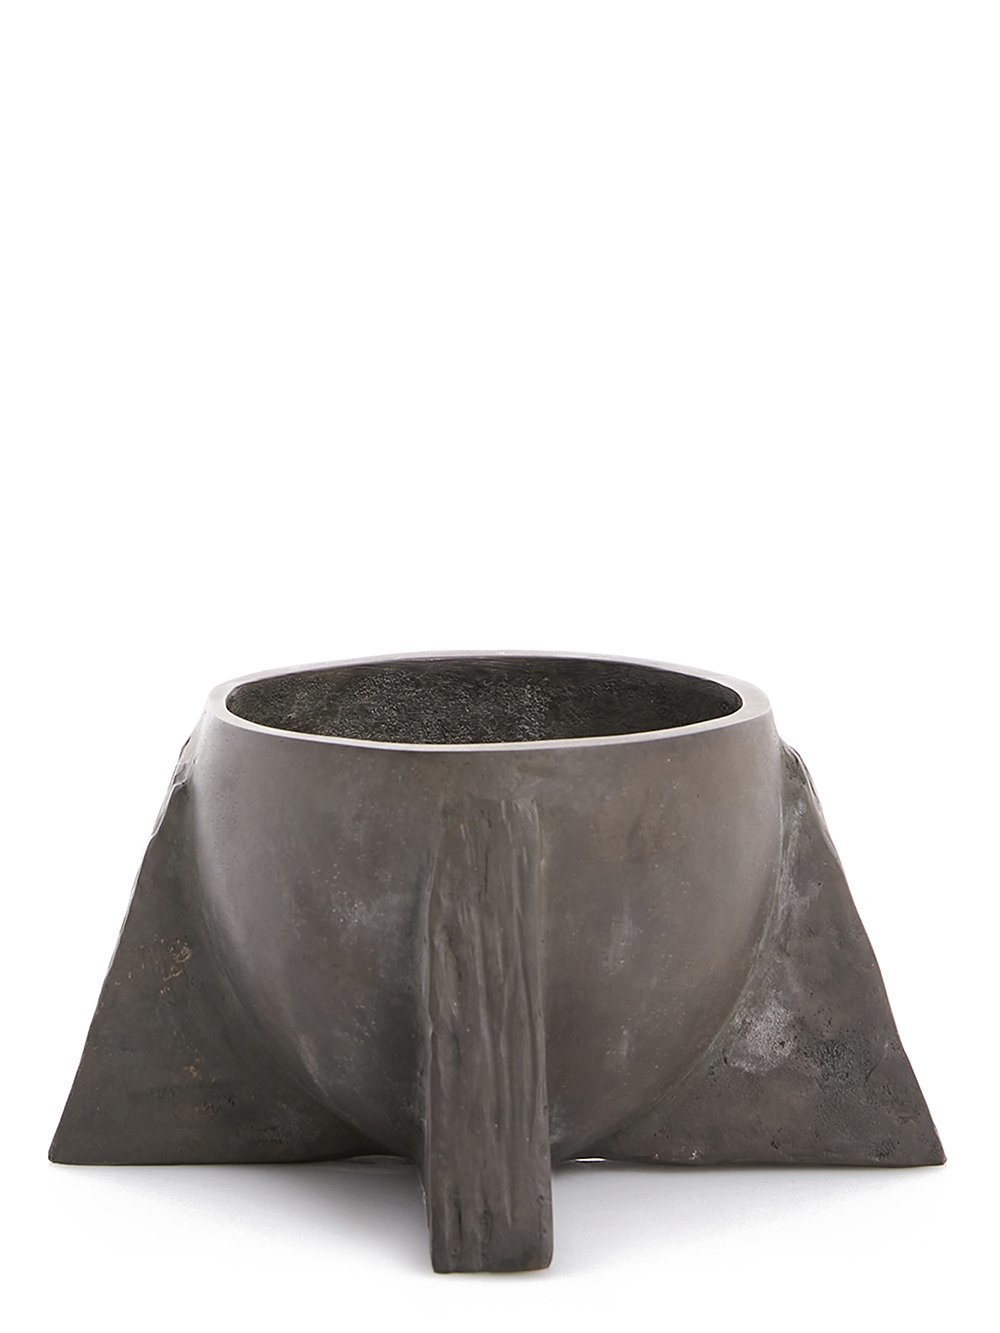 RICK OWENS COUPE IN NITRATE BRONZE HAS AN HALF-OVAL SHAPE, FEATURES FOUR LEGS AND SLIGHTLY IRREGULAR SURFACE.